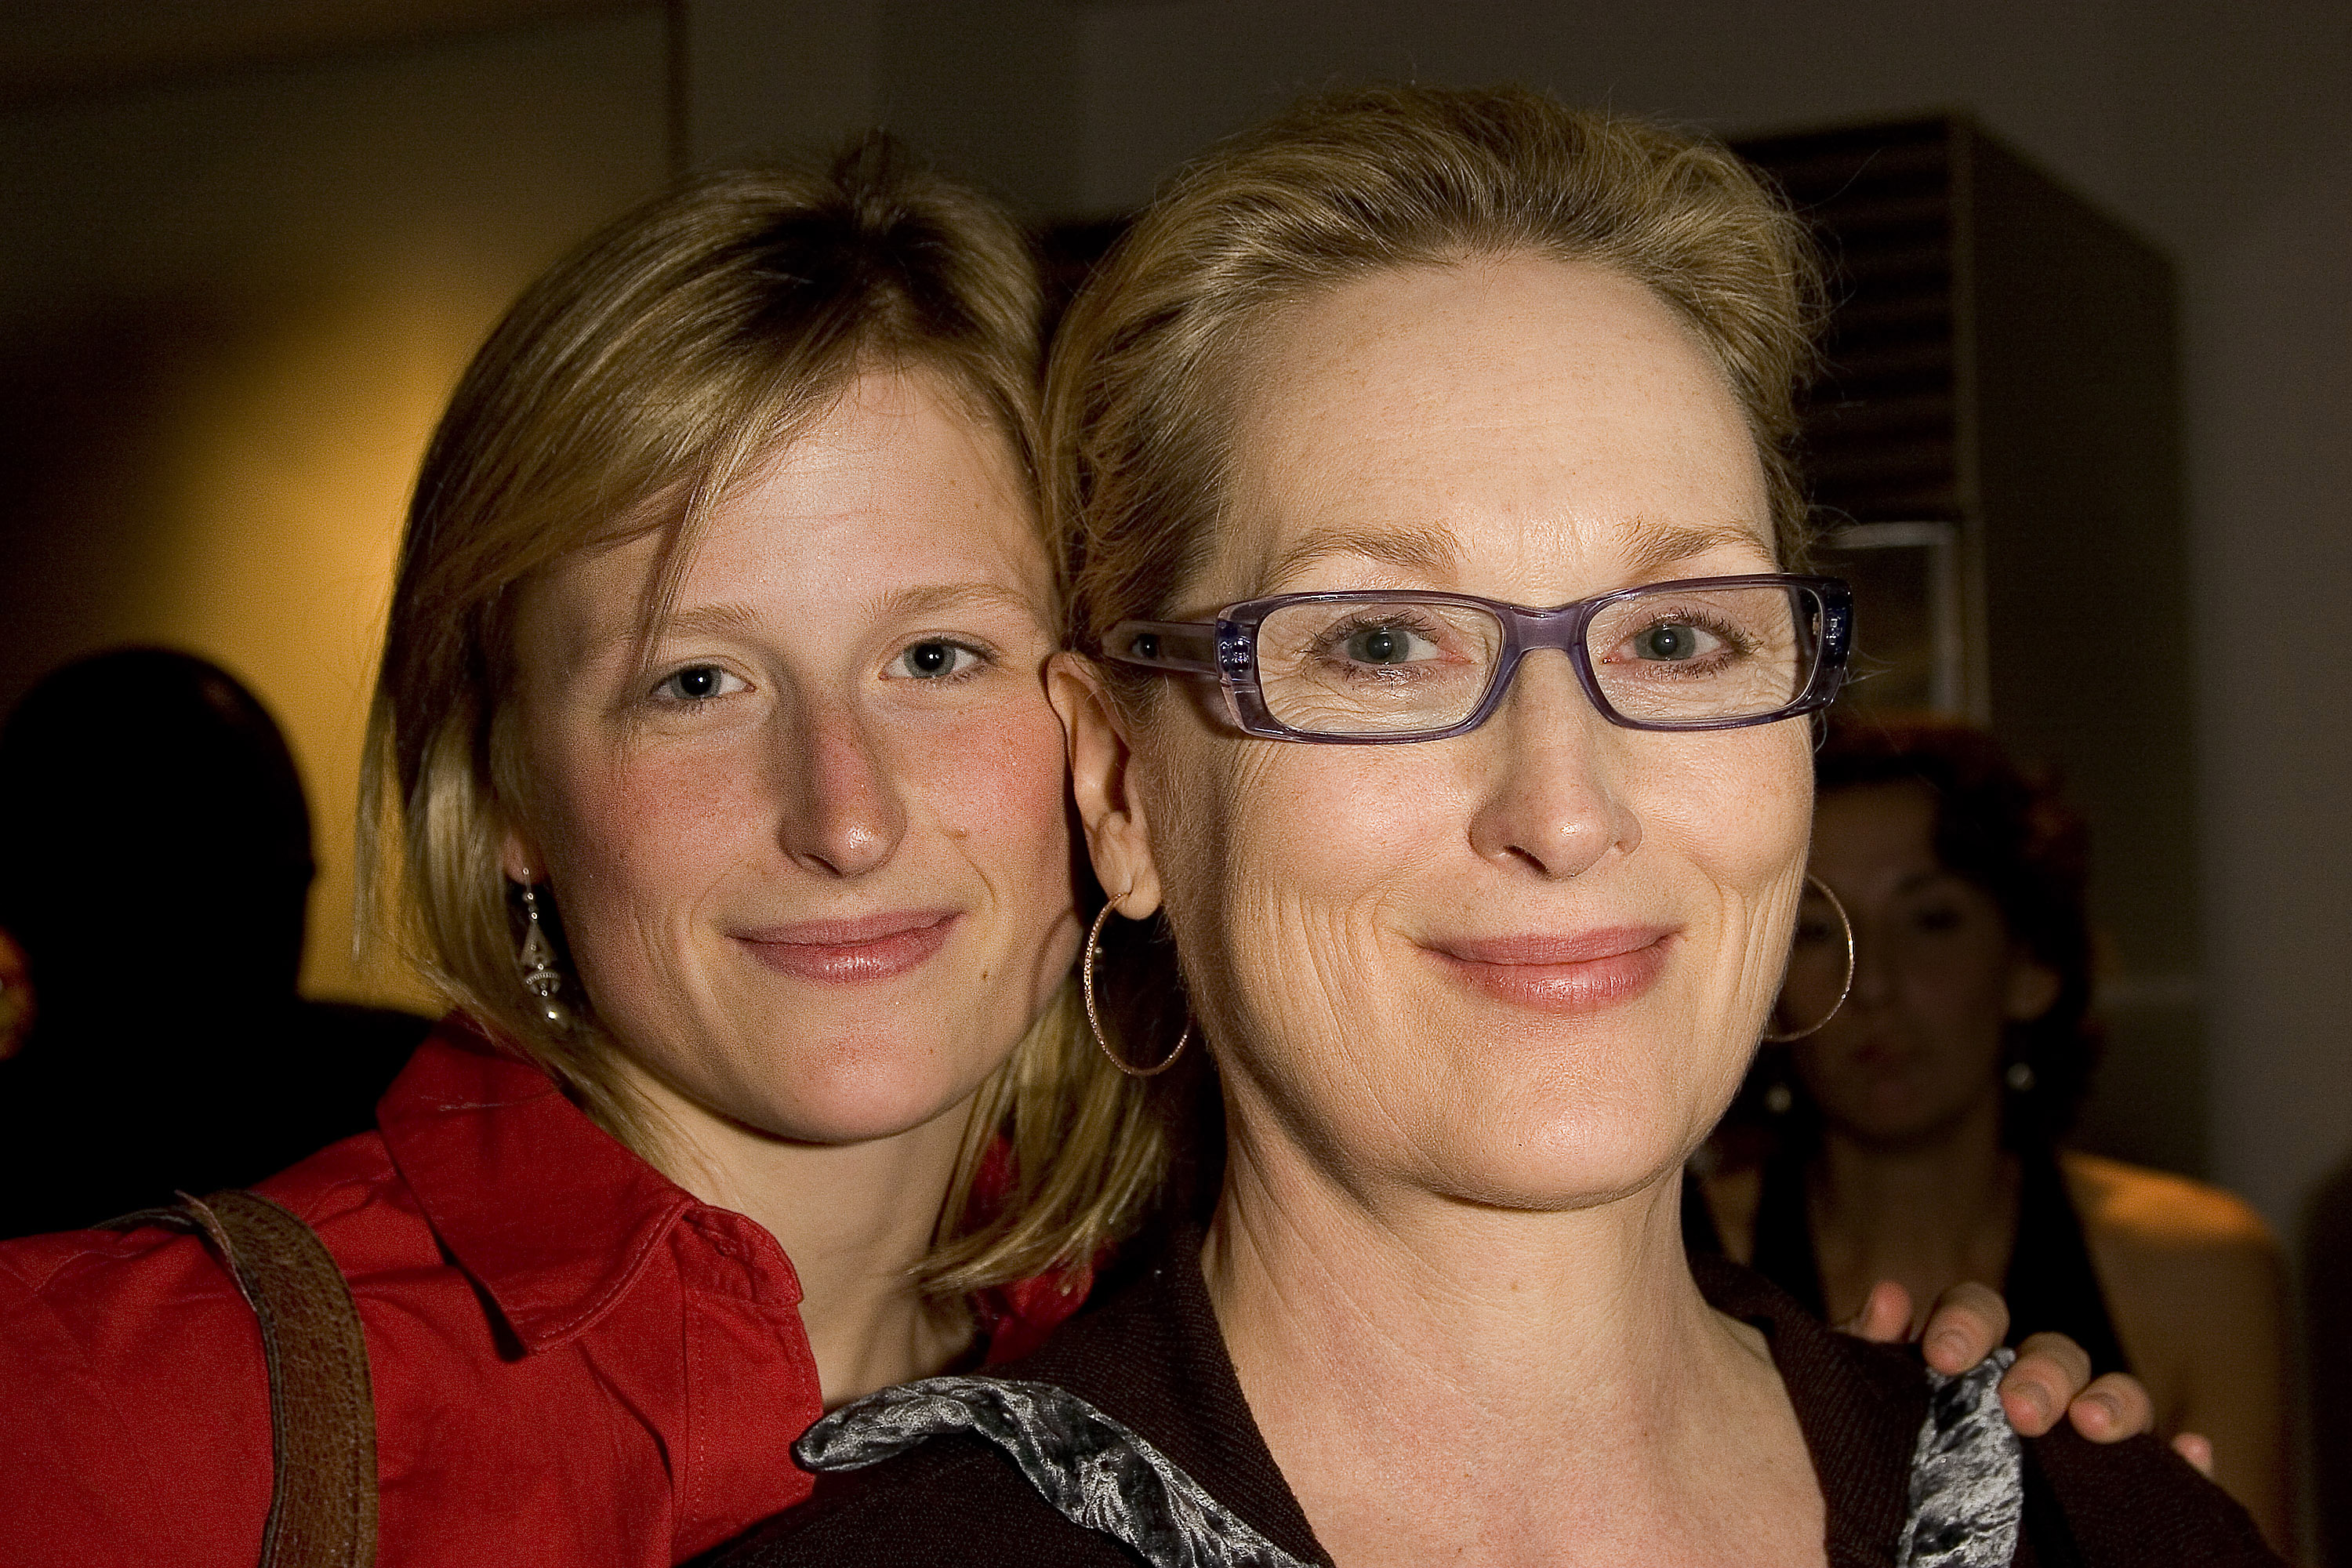 Mamie Gummer et Meryl Streep assistent à On The Road to Equality-An Evening of Jazz and Readings to Benefit Equality Now, le 15 mai 2006. | Source : Getty Images